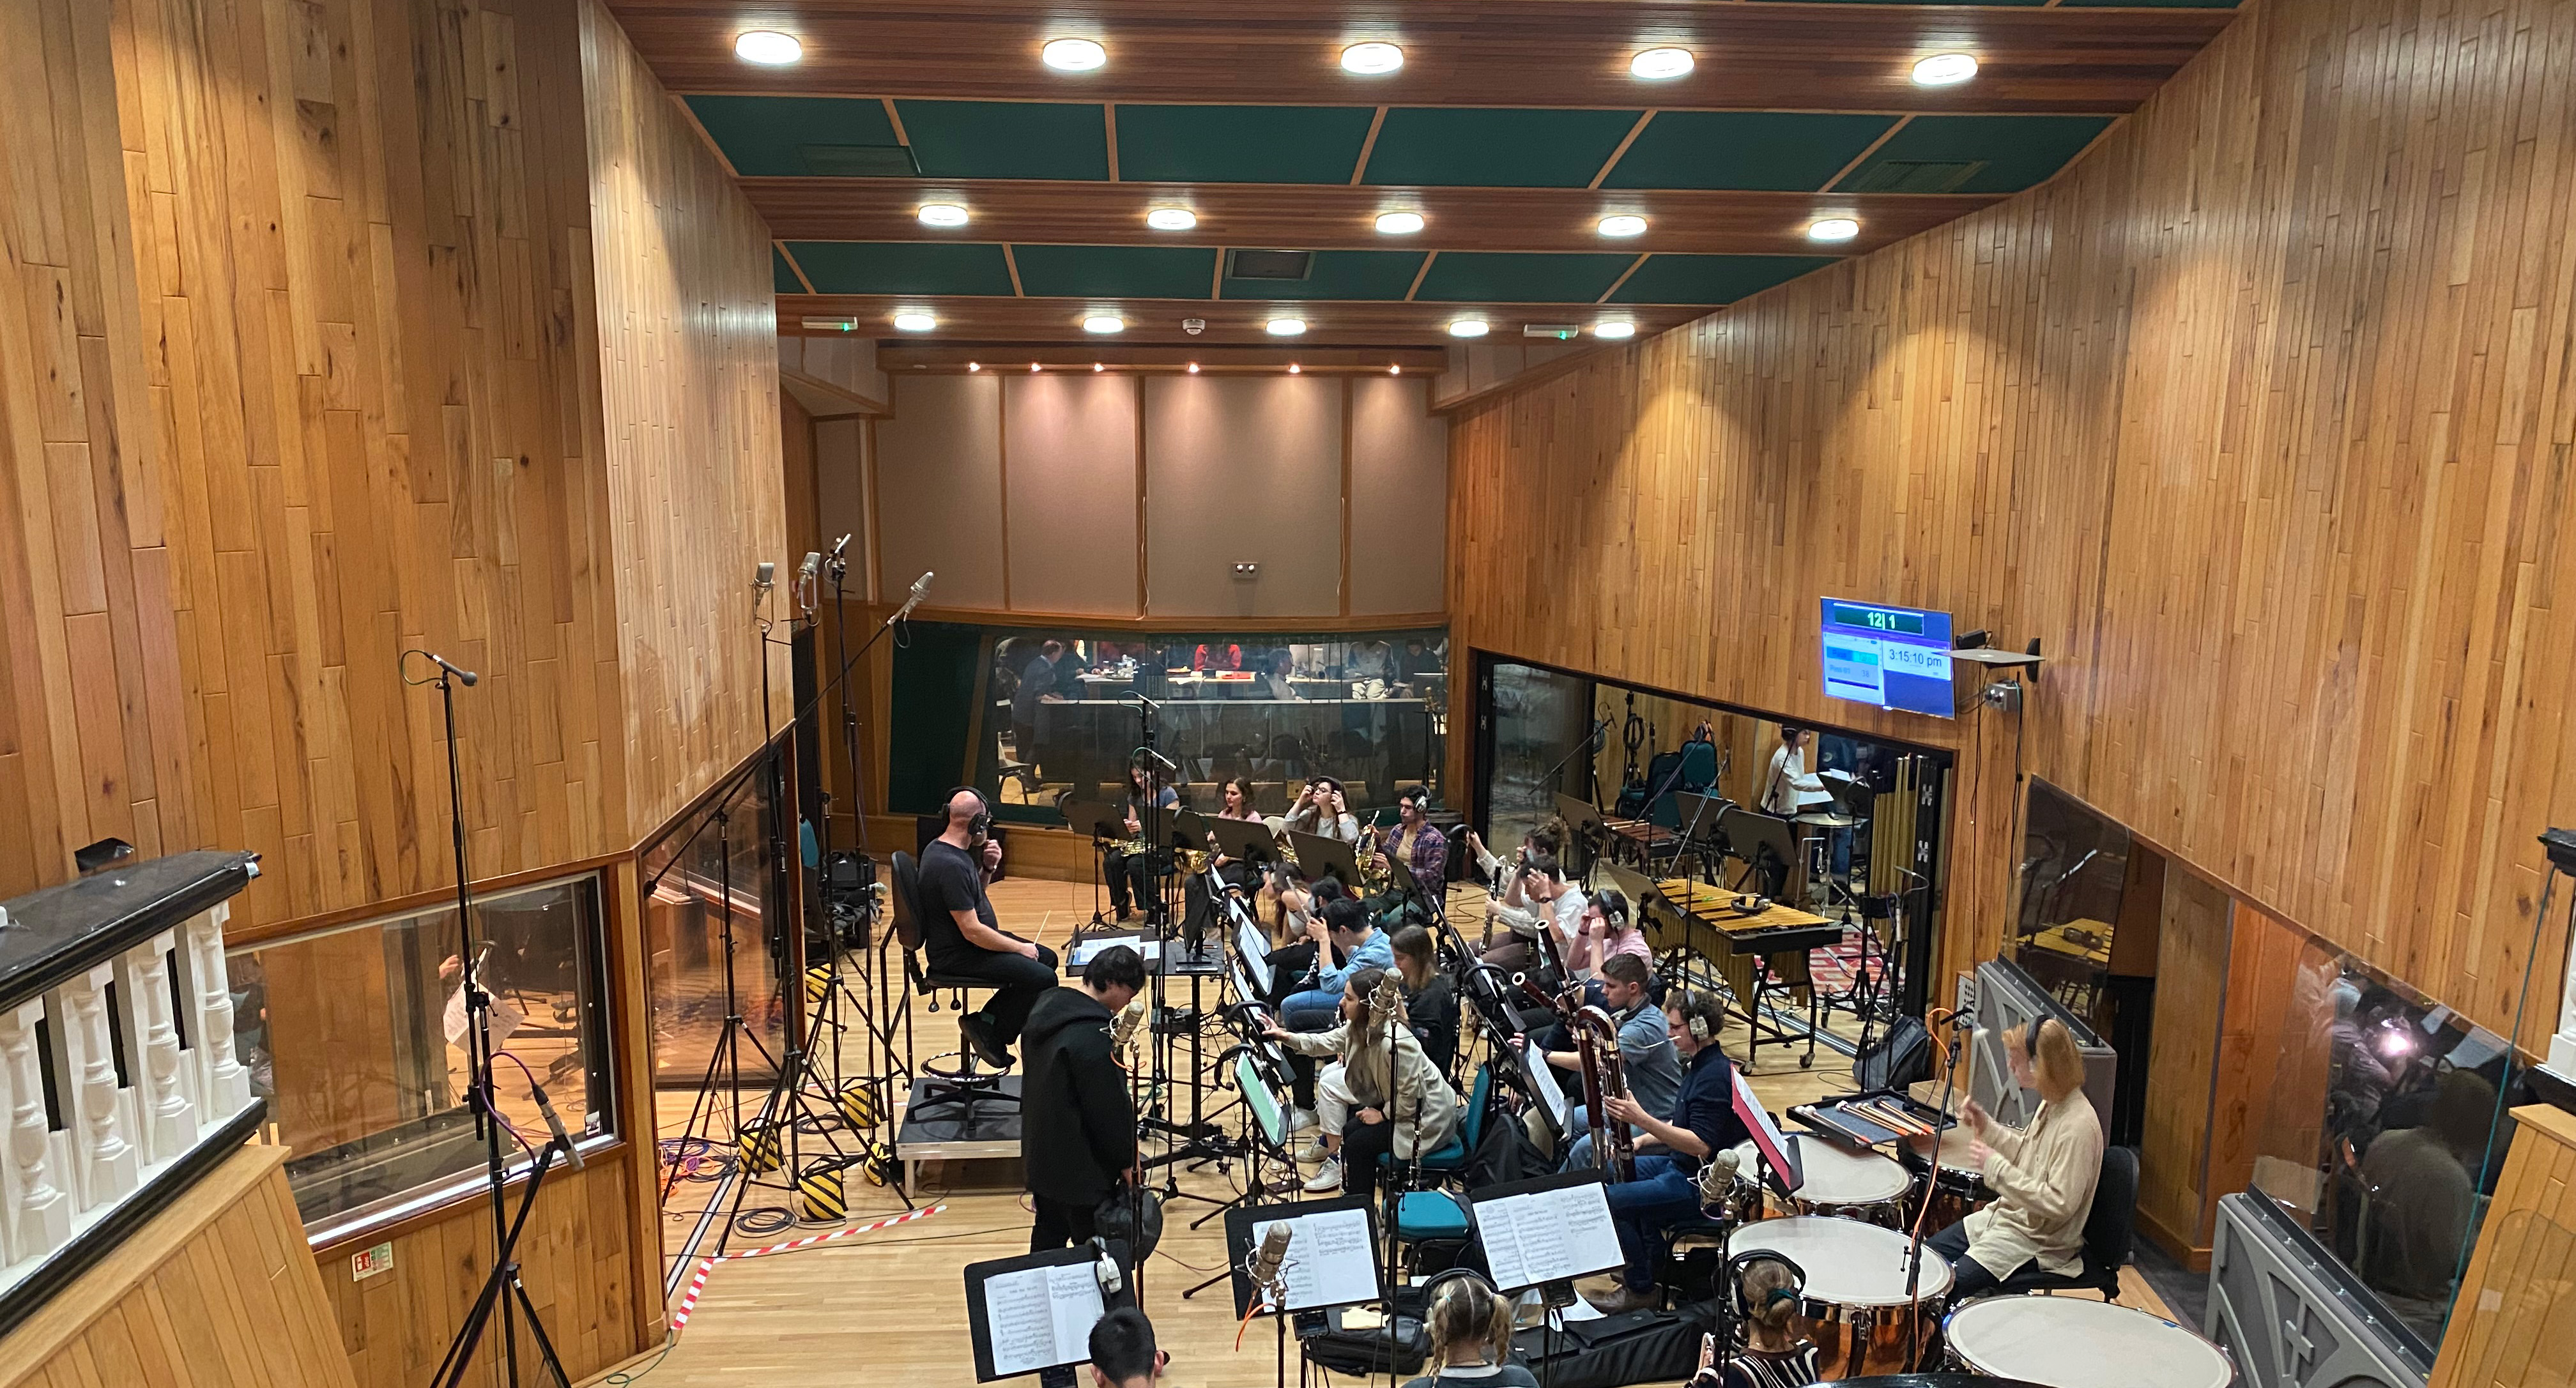 RCM Symphony Orchestra performing at Abbey Road Institute in a wood-panelled recording hall, with recording studio behind them.